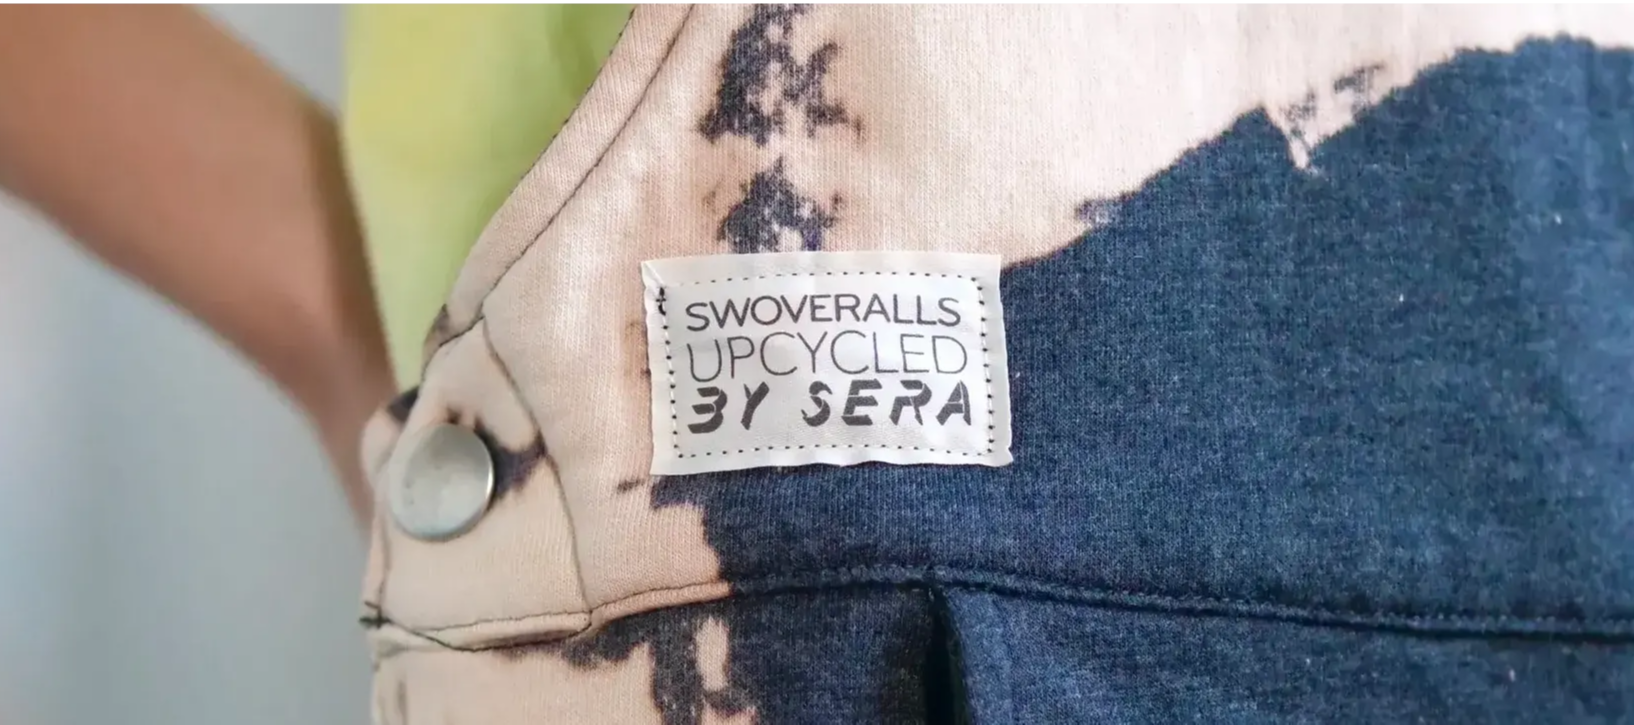 Swoveralls Upcycled by Sera